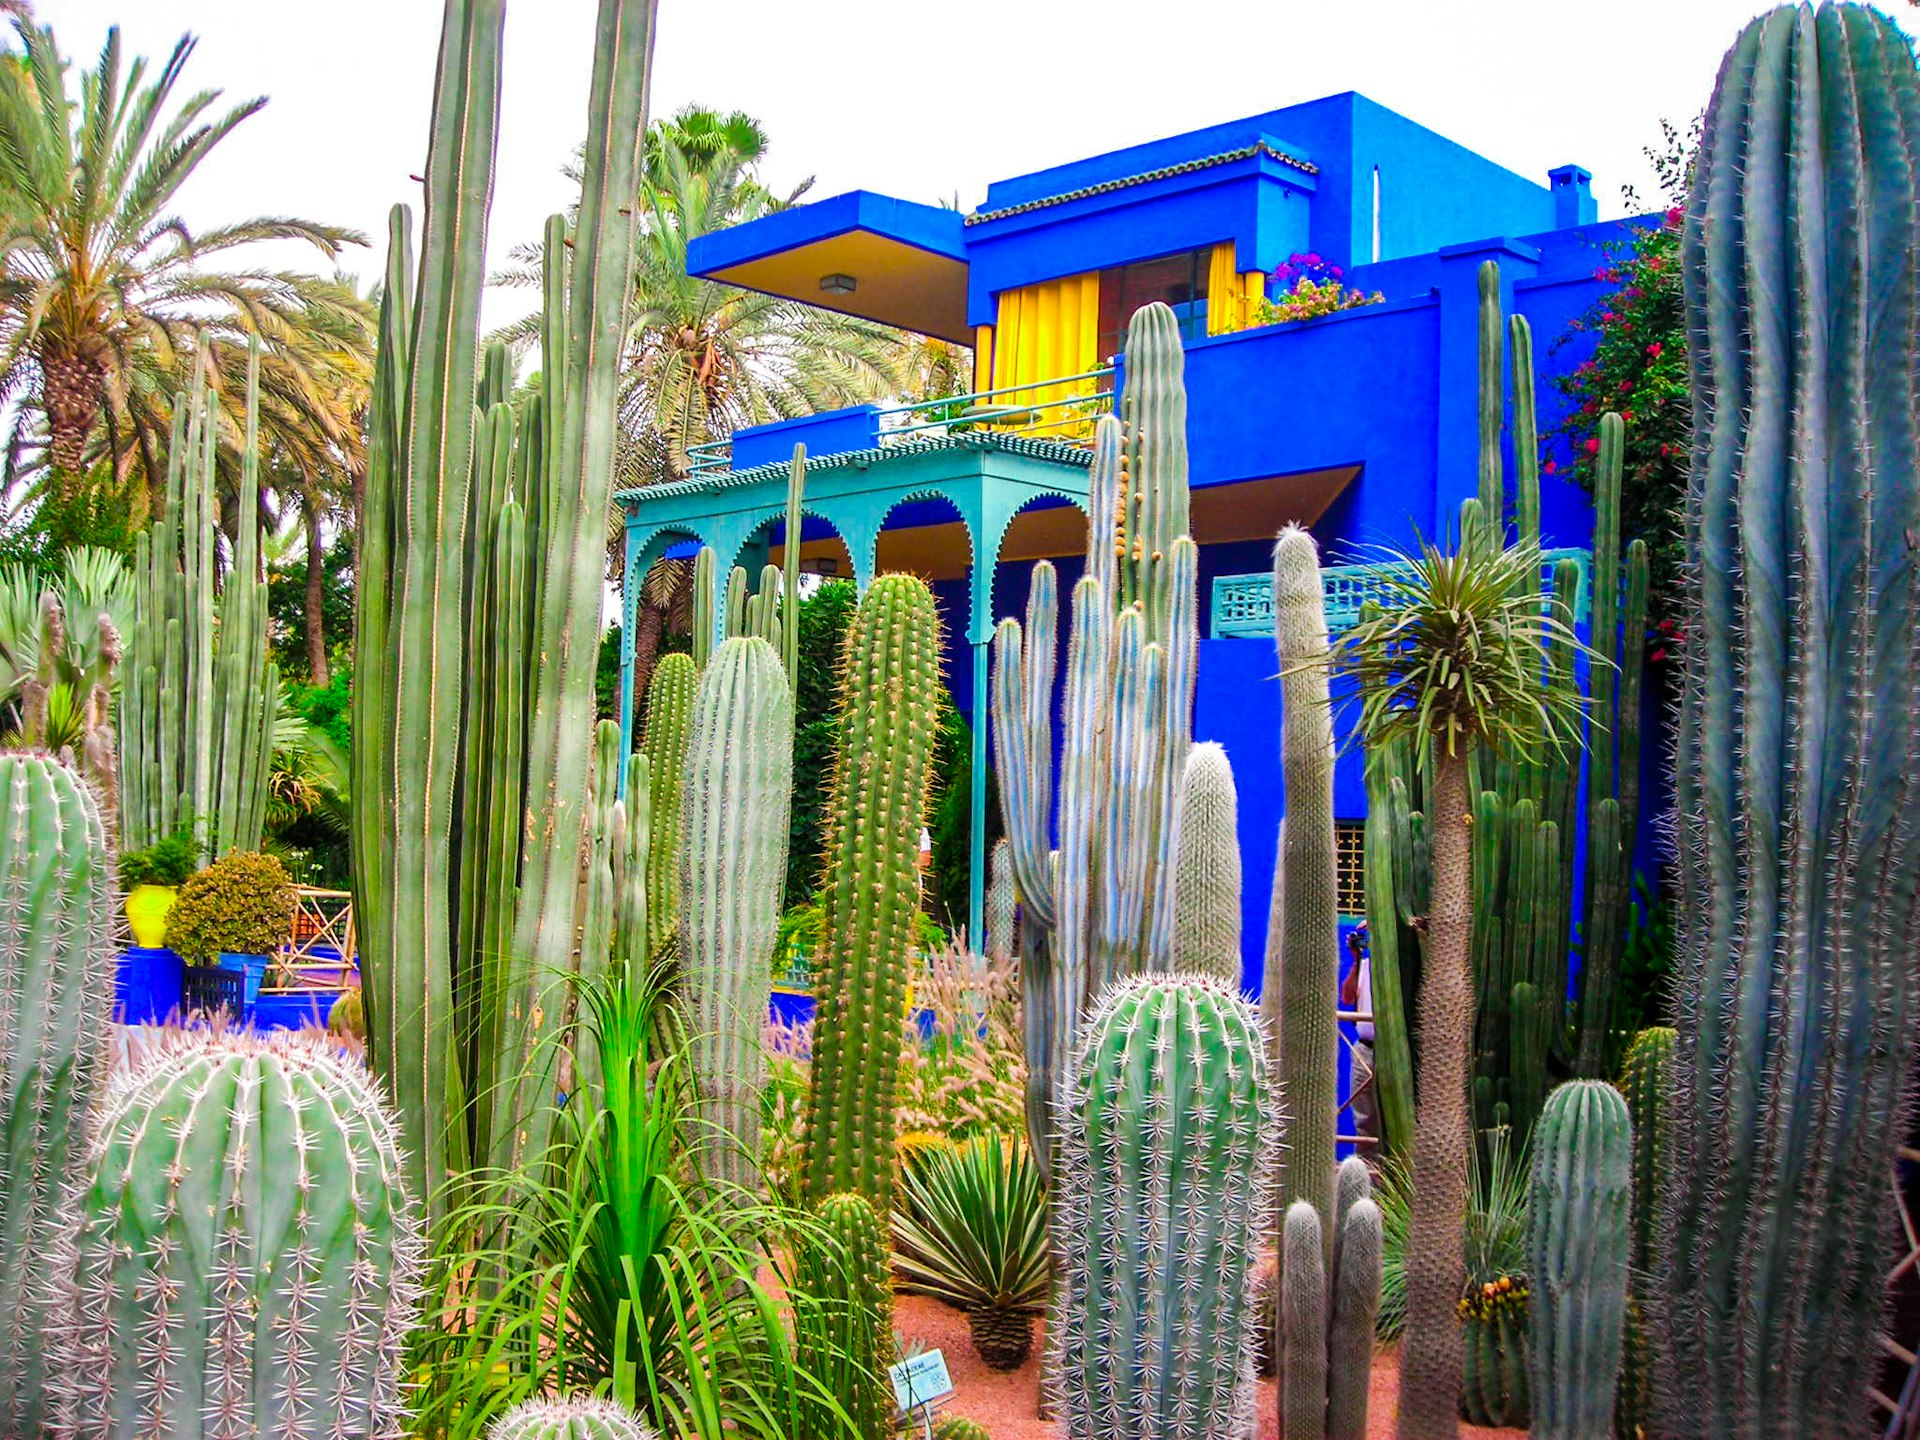 An exotic cactus in Jardian Majorelle, Marrakech with a variety of tall, spiky cacti positioned in front of a strikingly blue building with yellow window frames. The sky above is overcast, providing a soft light that accentuates the architectural beauty of the structure and the sculptural forms of the cacti